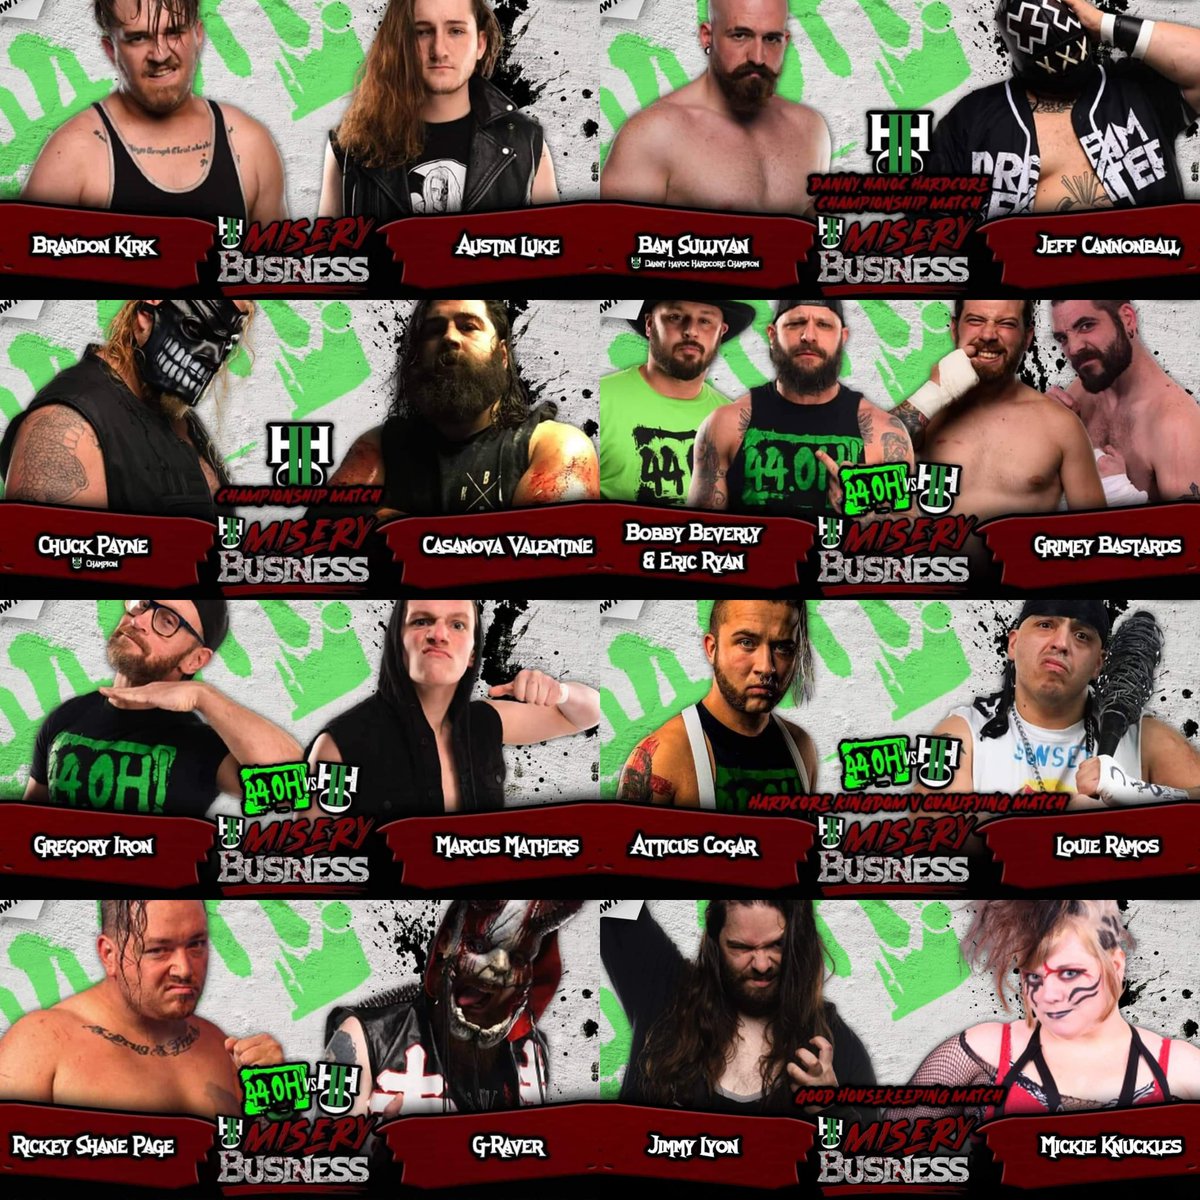 THIS SATURDAY Williamstown, NJ. @H_2_0WRESTLING 'MISERY BUSINESS' w/ @TremontH2O @TheChuckPayne1 @BloodyMickie @KnuxOg @chondowrestling @RickeyShanePage @BobbyBeverly @Ericryanpro @dmooreh20 @JeffCannonball @LowlifeLouie @TheReal_Kirk @Atticus_Cogar &MORE